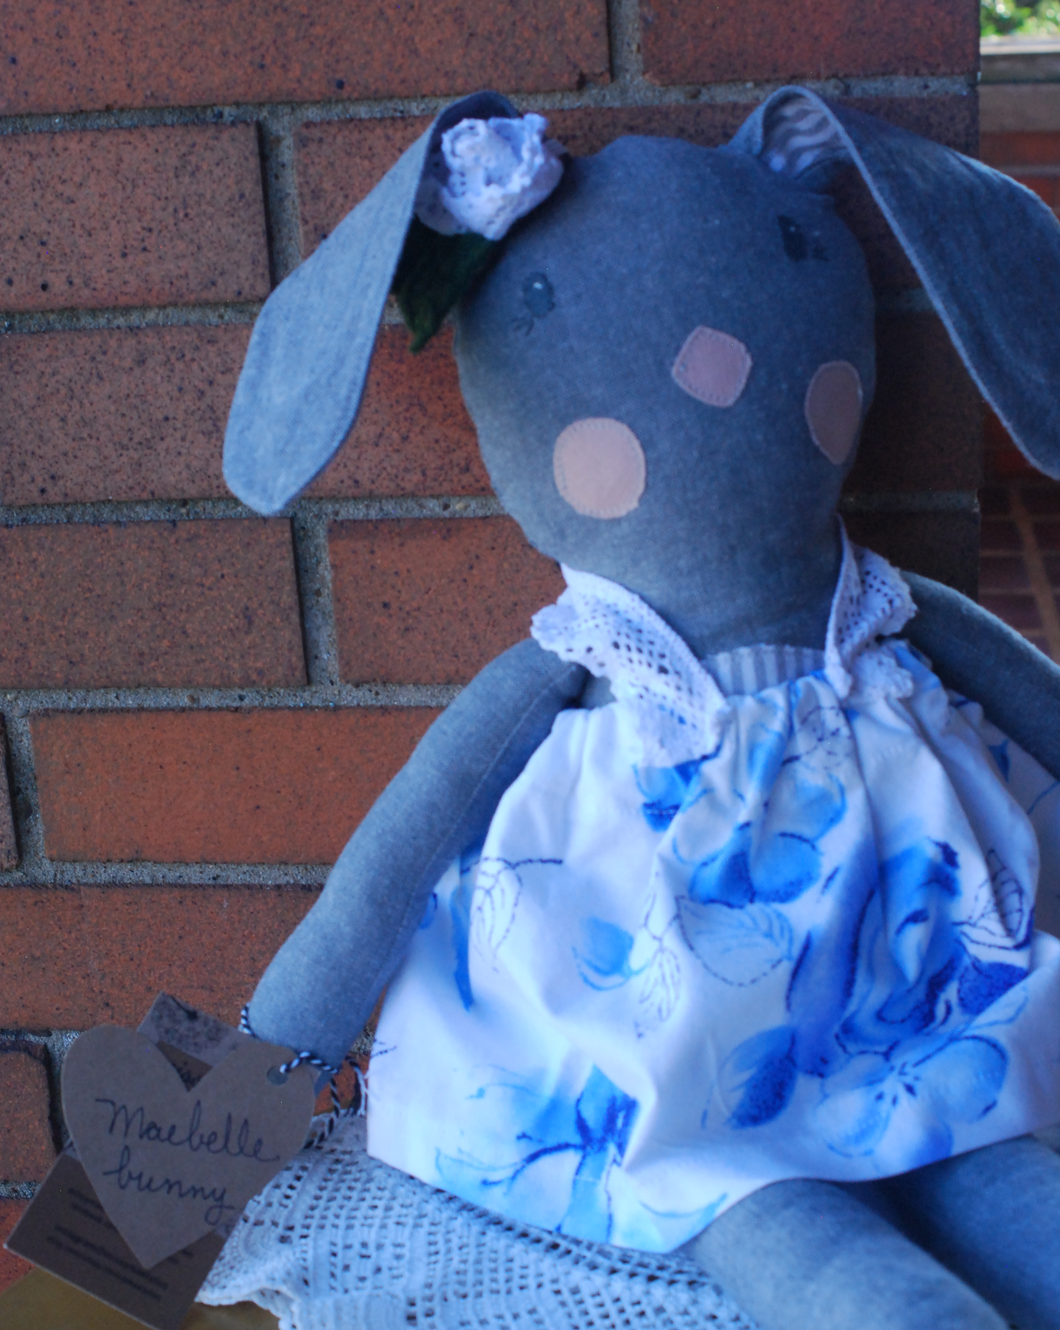 Maybelle Bunny Linen Doll